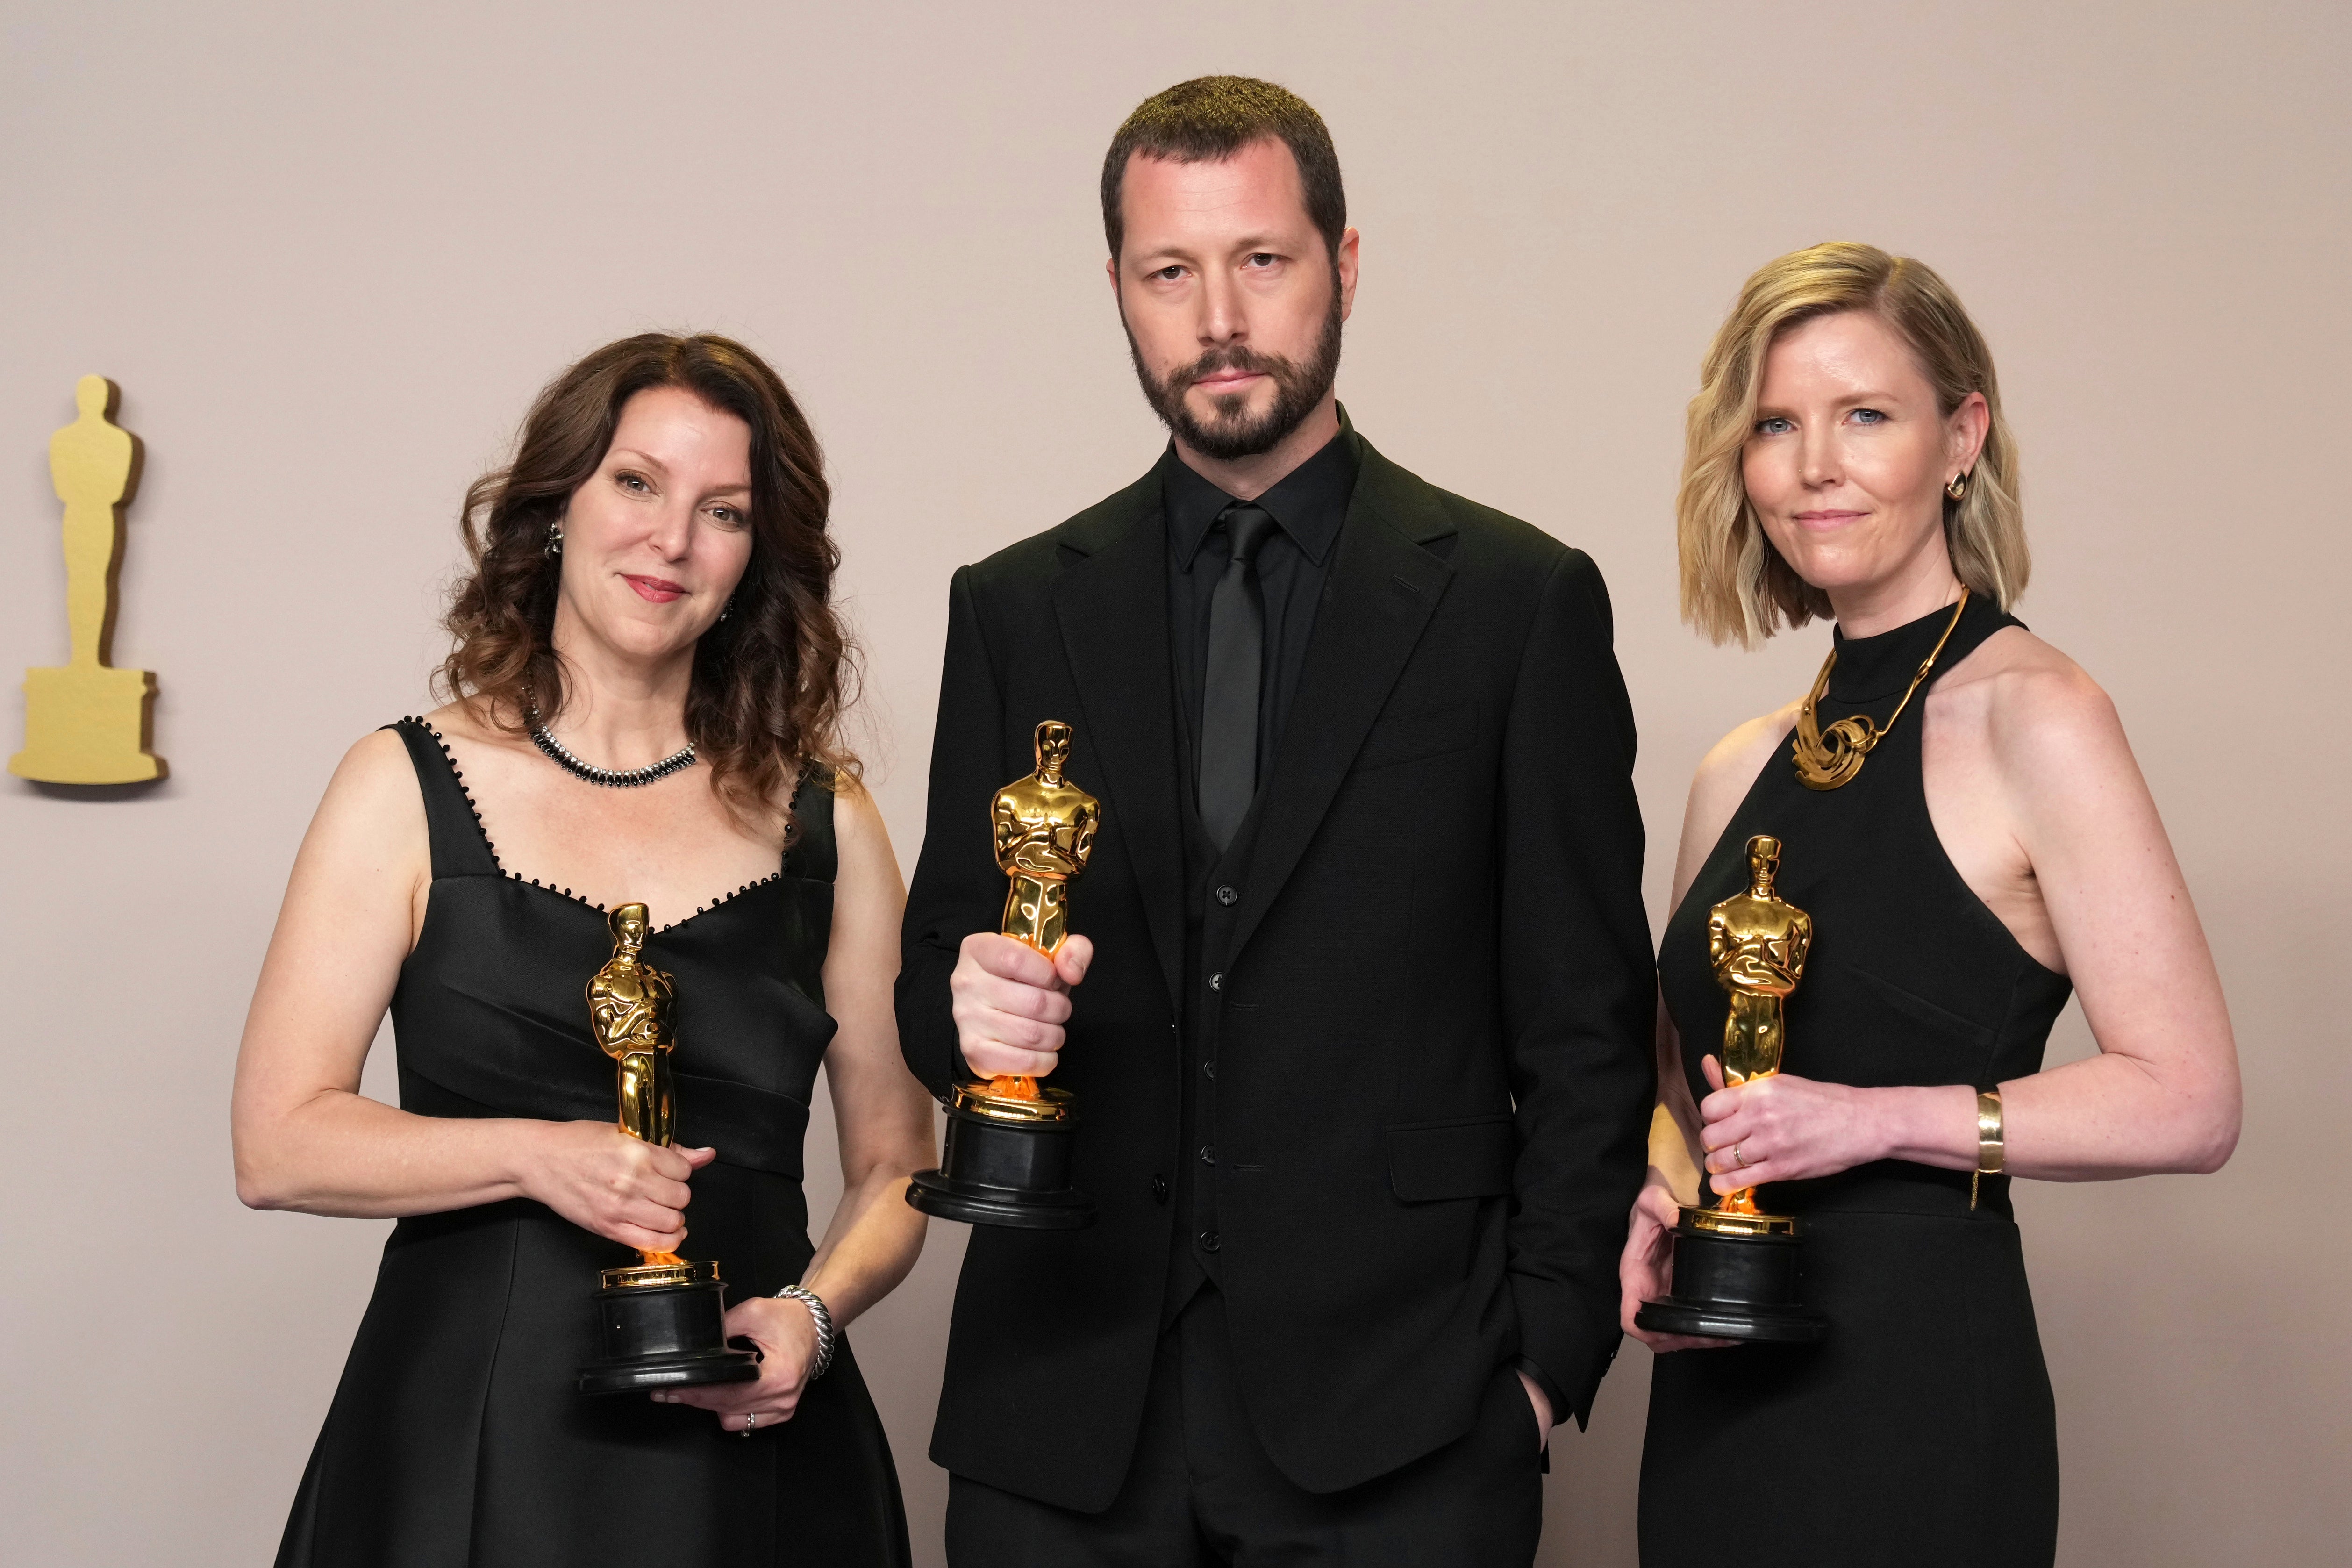 Raney Aronson-Rath, from left, Mstyslav Chernov, and Michelle Mizner pose in the press room with the award for best documentary feature film for "20 Days in Mariupol" at the Oscars